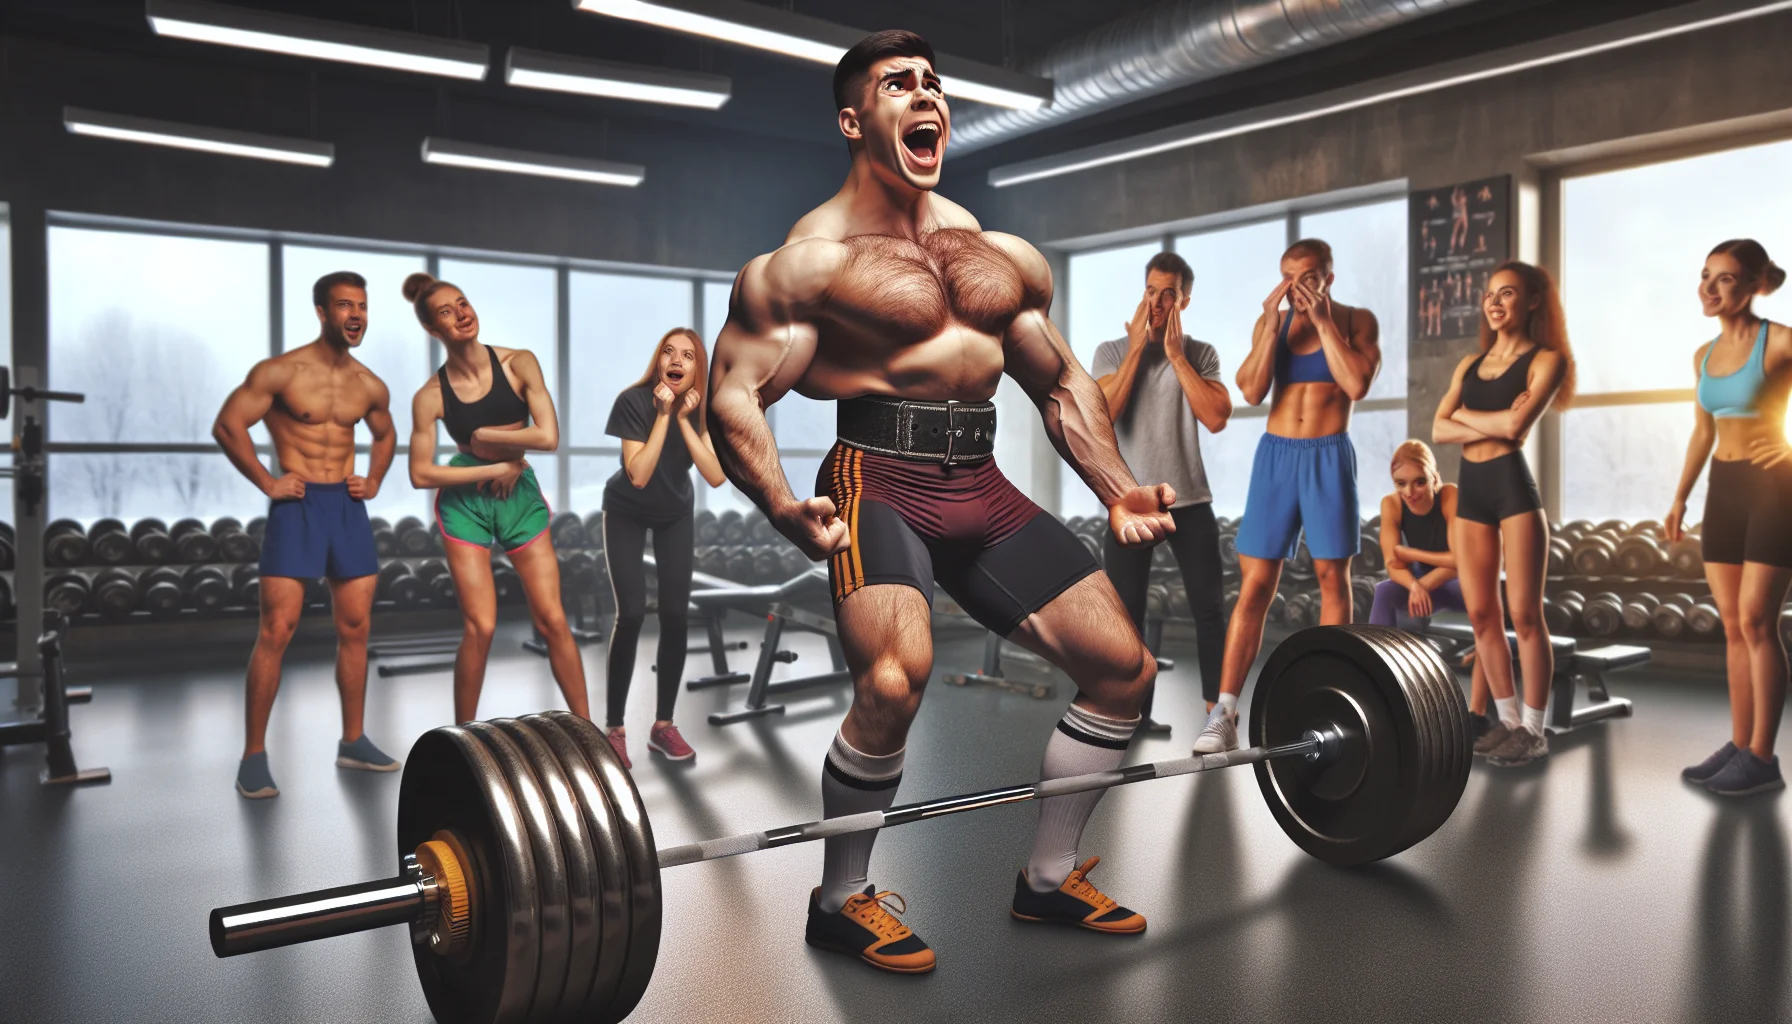 Create a realistic image showcasing a powerlifter with a physique akin to a professional athlete involved in a humorous scenario that encourages people to workout. The scene could be set within a gym decked with assorted weights and workout equipment, the powerlifter attempting to lift a barbell that's playfully exaggerated in size. Draw attention to the comedic struggle but also the determination and perseverance, paired with bystanders of different genders, ancestries, and body types staring in awe or sharing a light-hearted laugh.